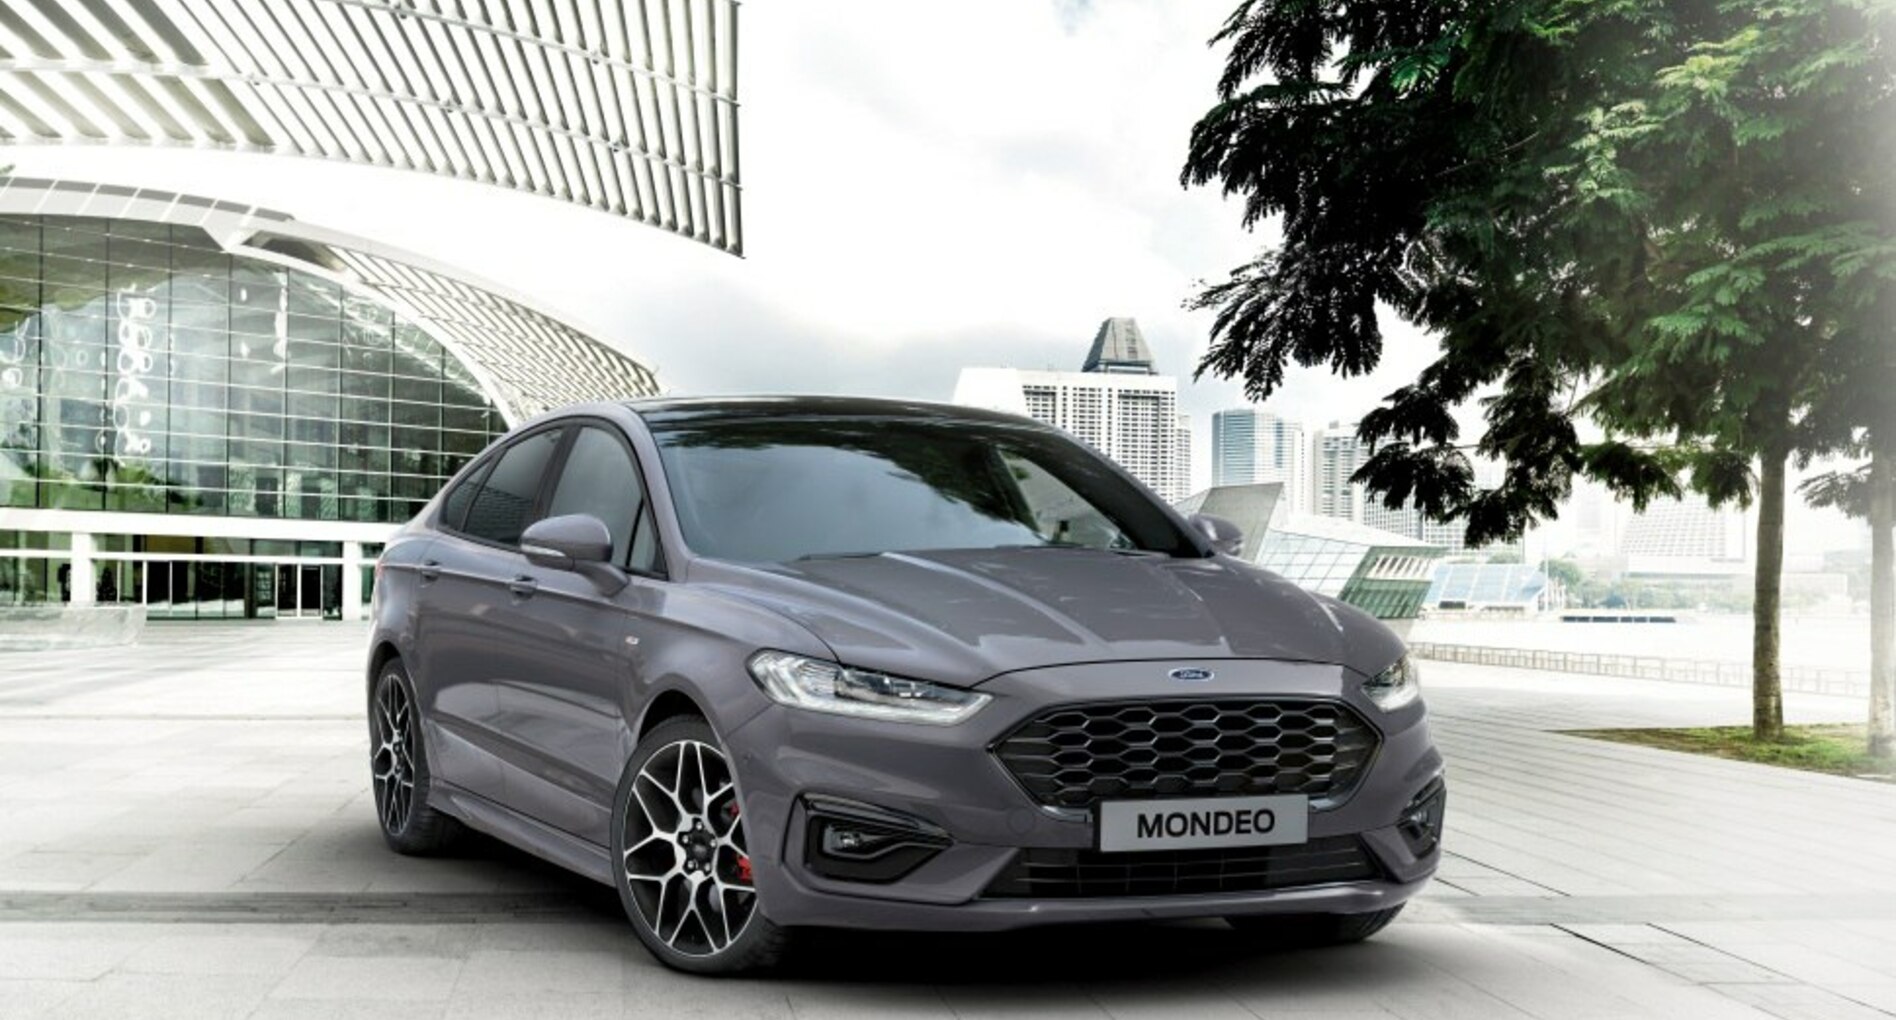 Ford Mondeo IV Hatchback (facelift 2019) 1.5 EcoBoost (165 Hp) Automatic 2019, 2020, 2021 